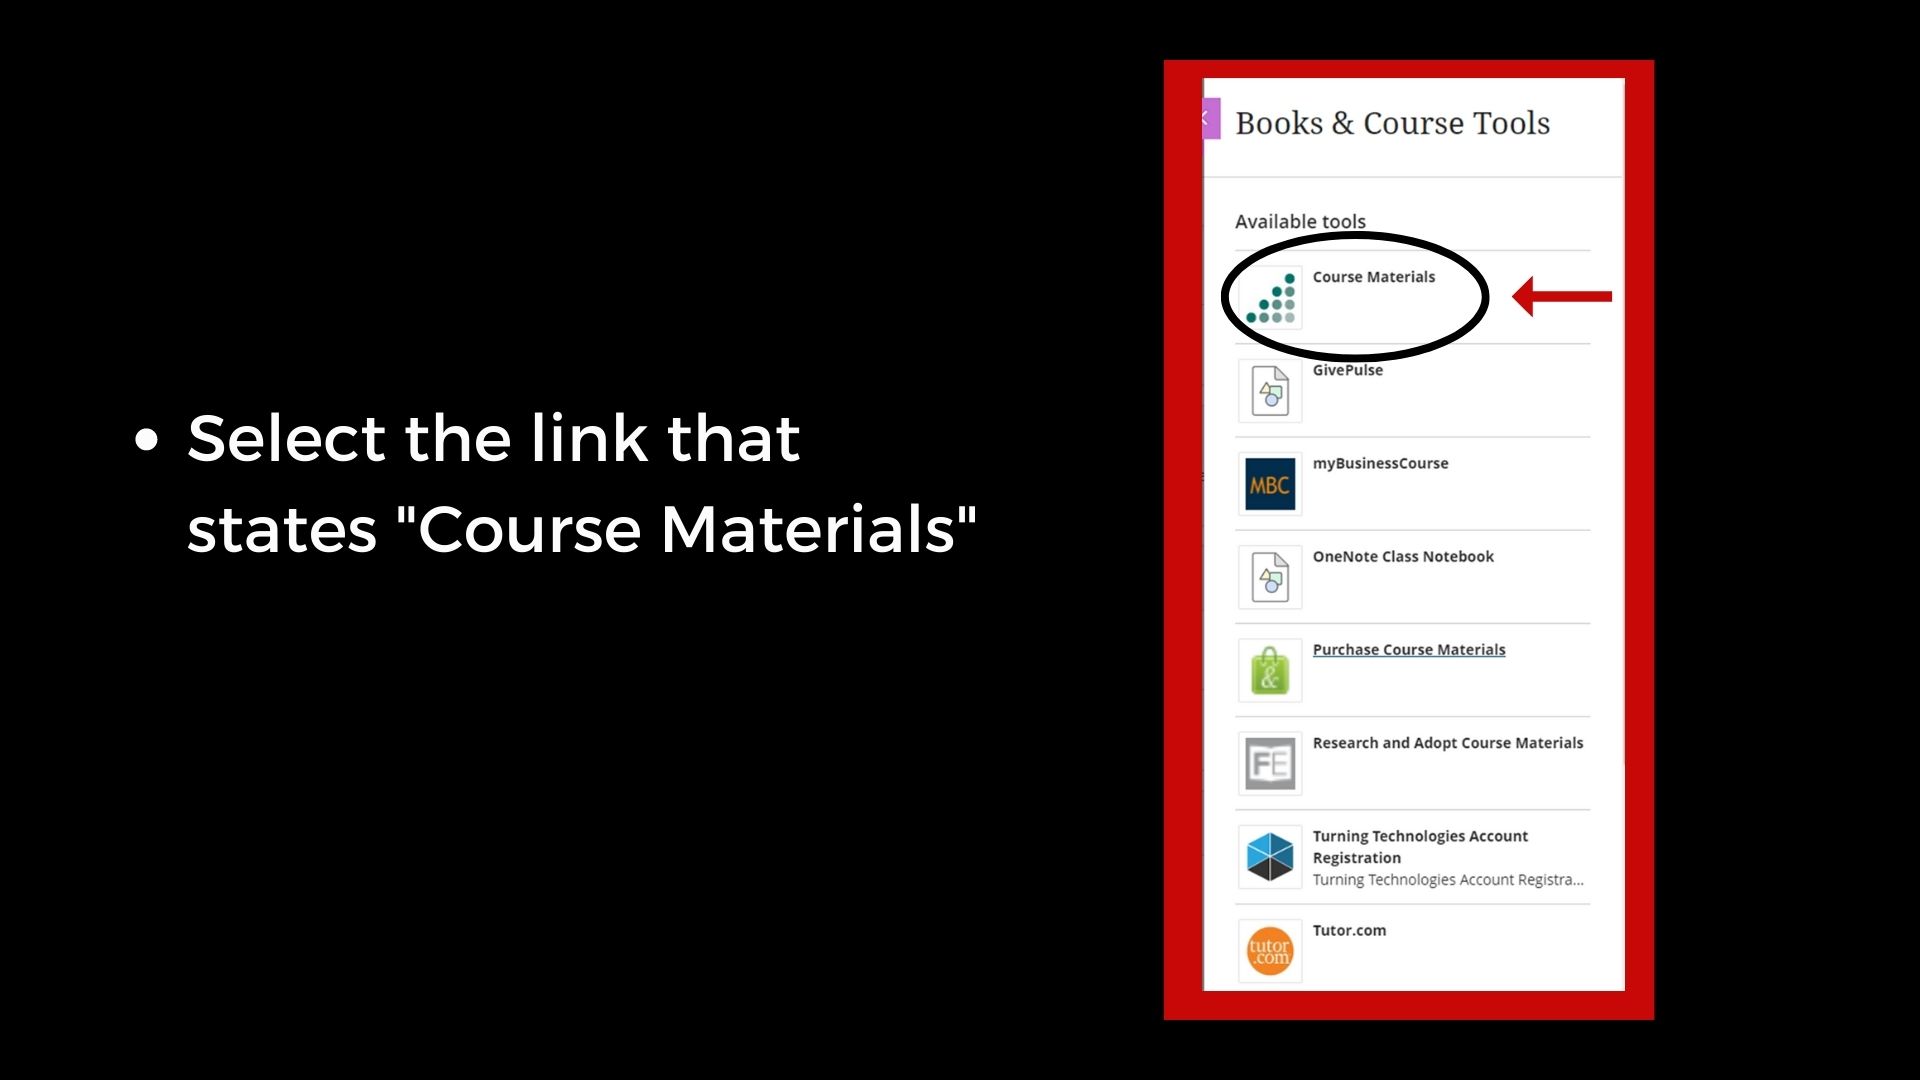 Select Course Materials